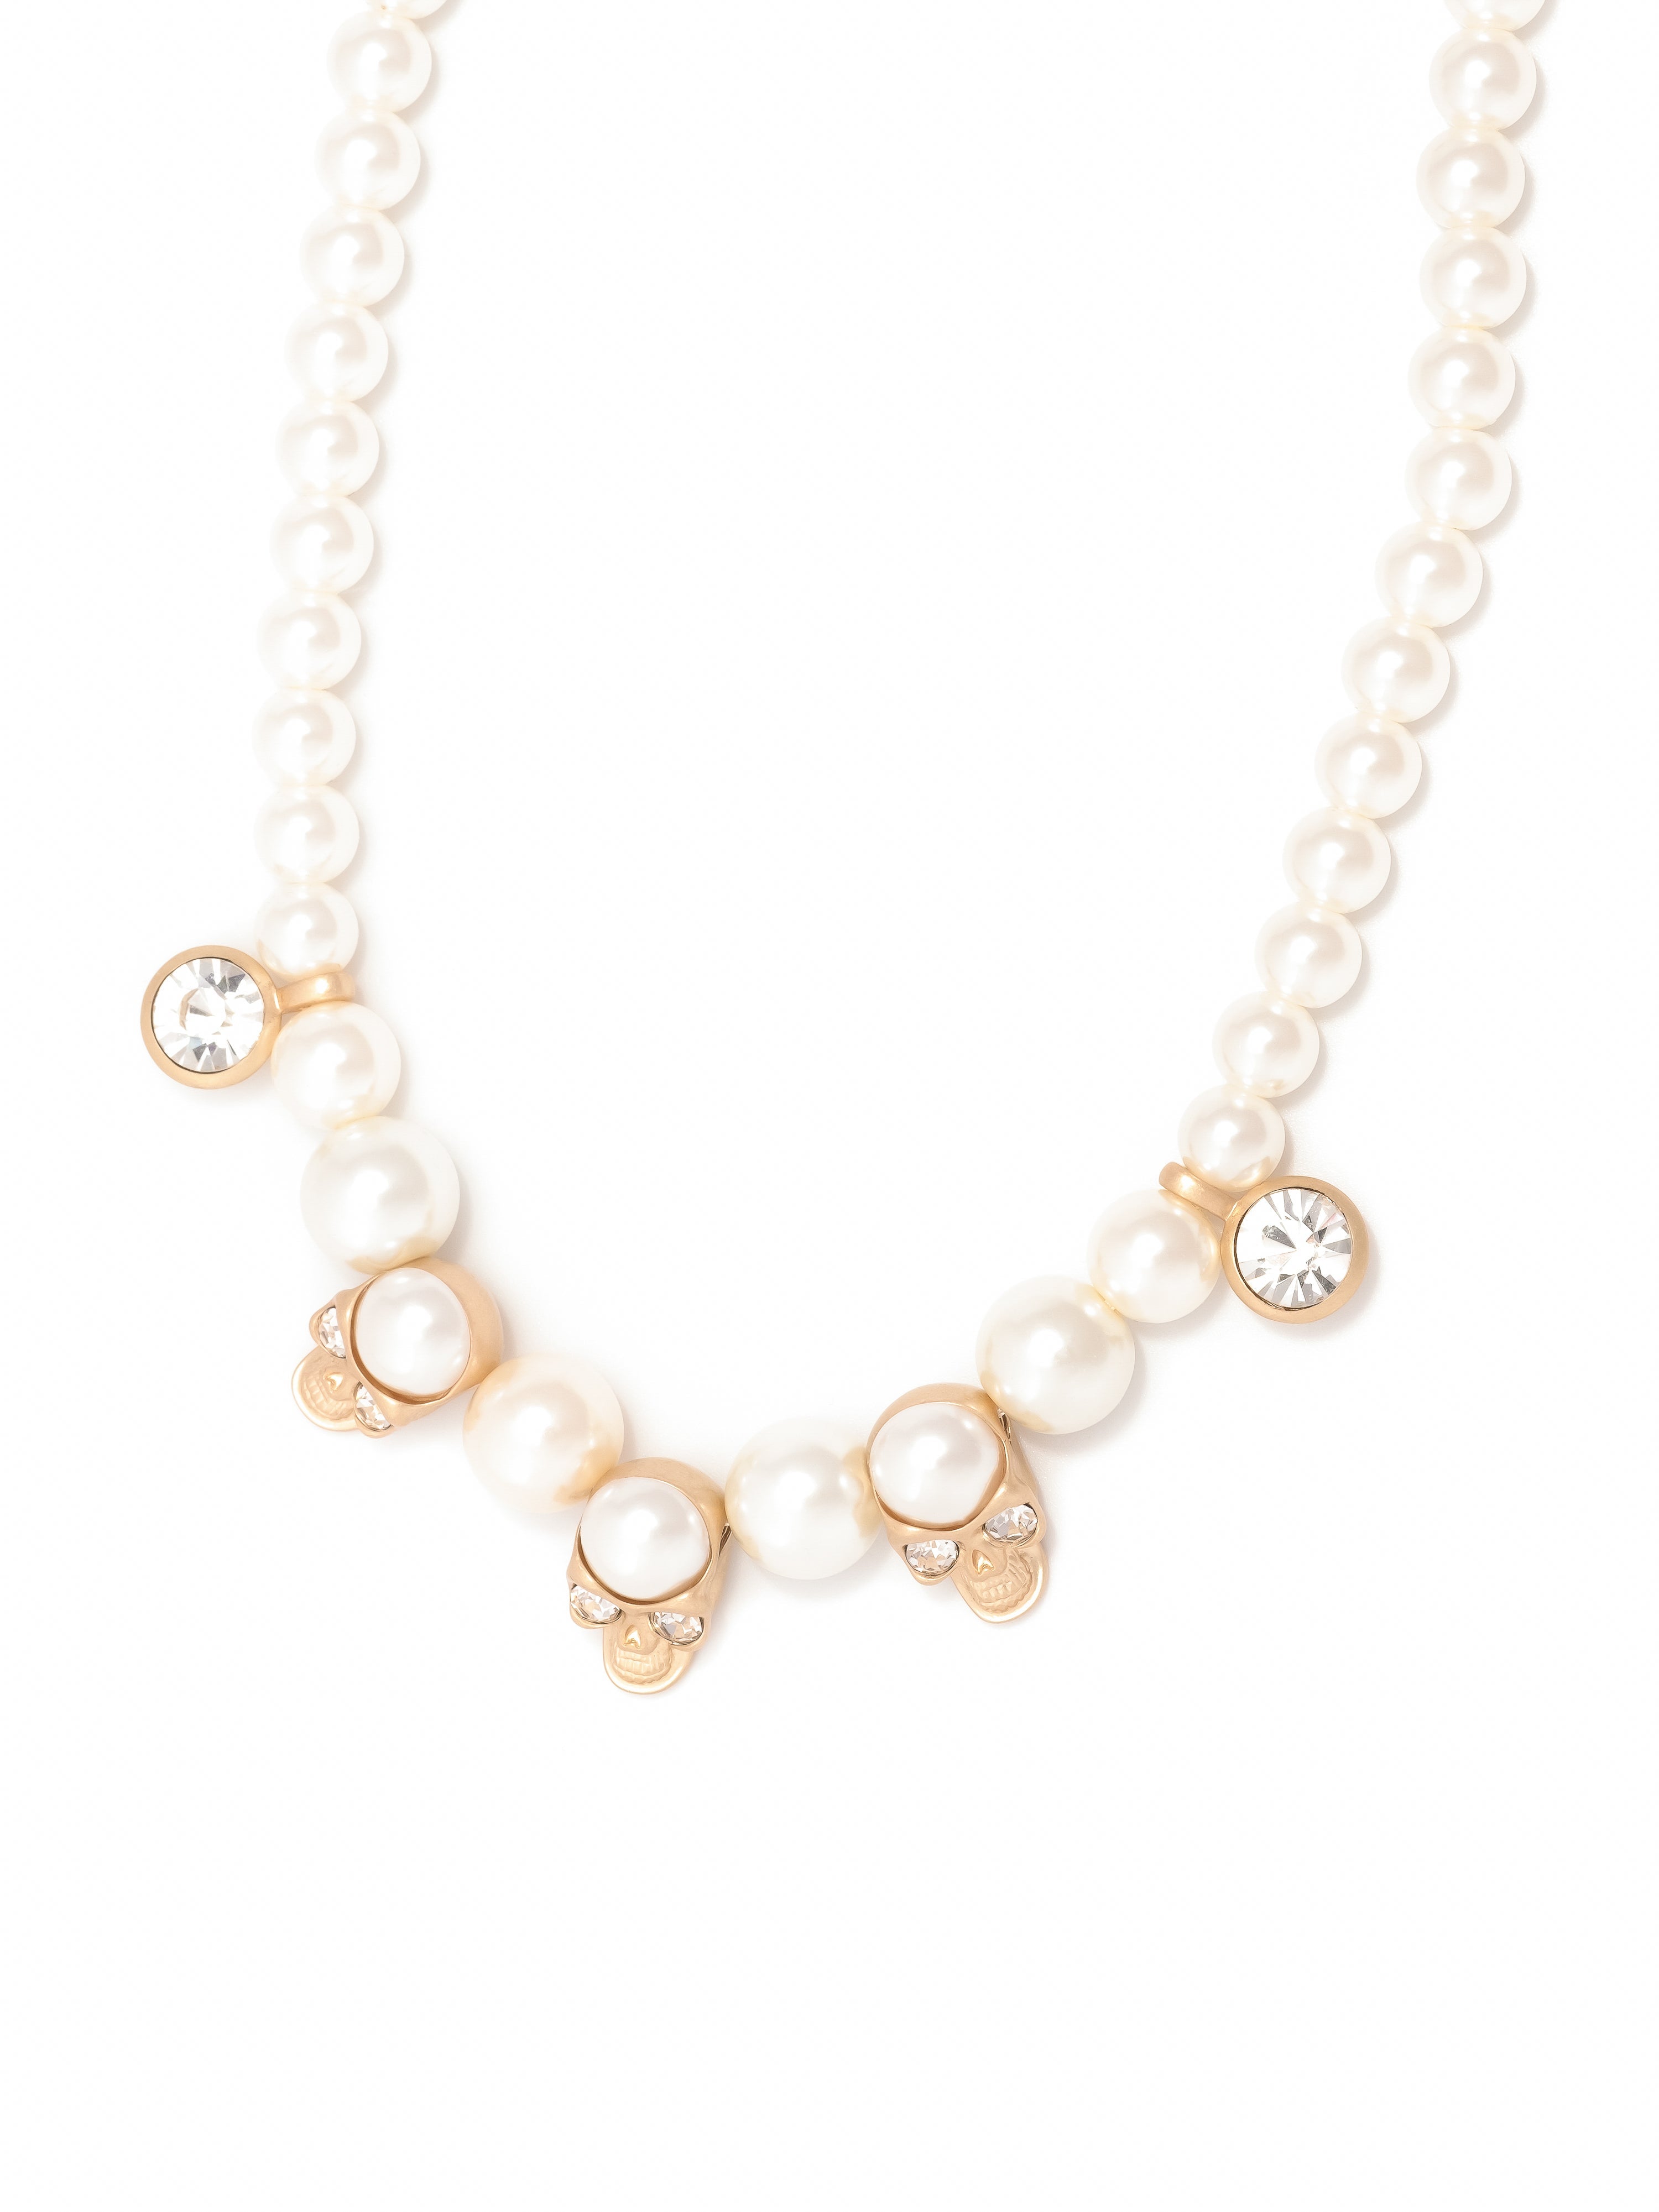 EVAE*+ SKULL PEARL NECKLACE